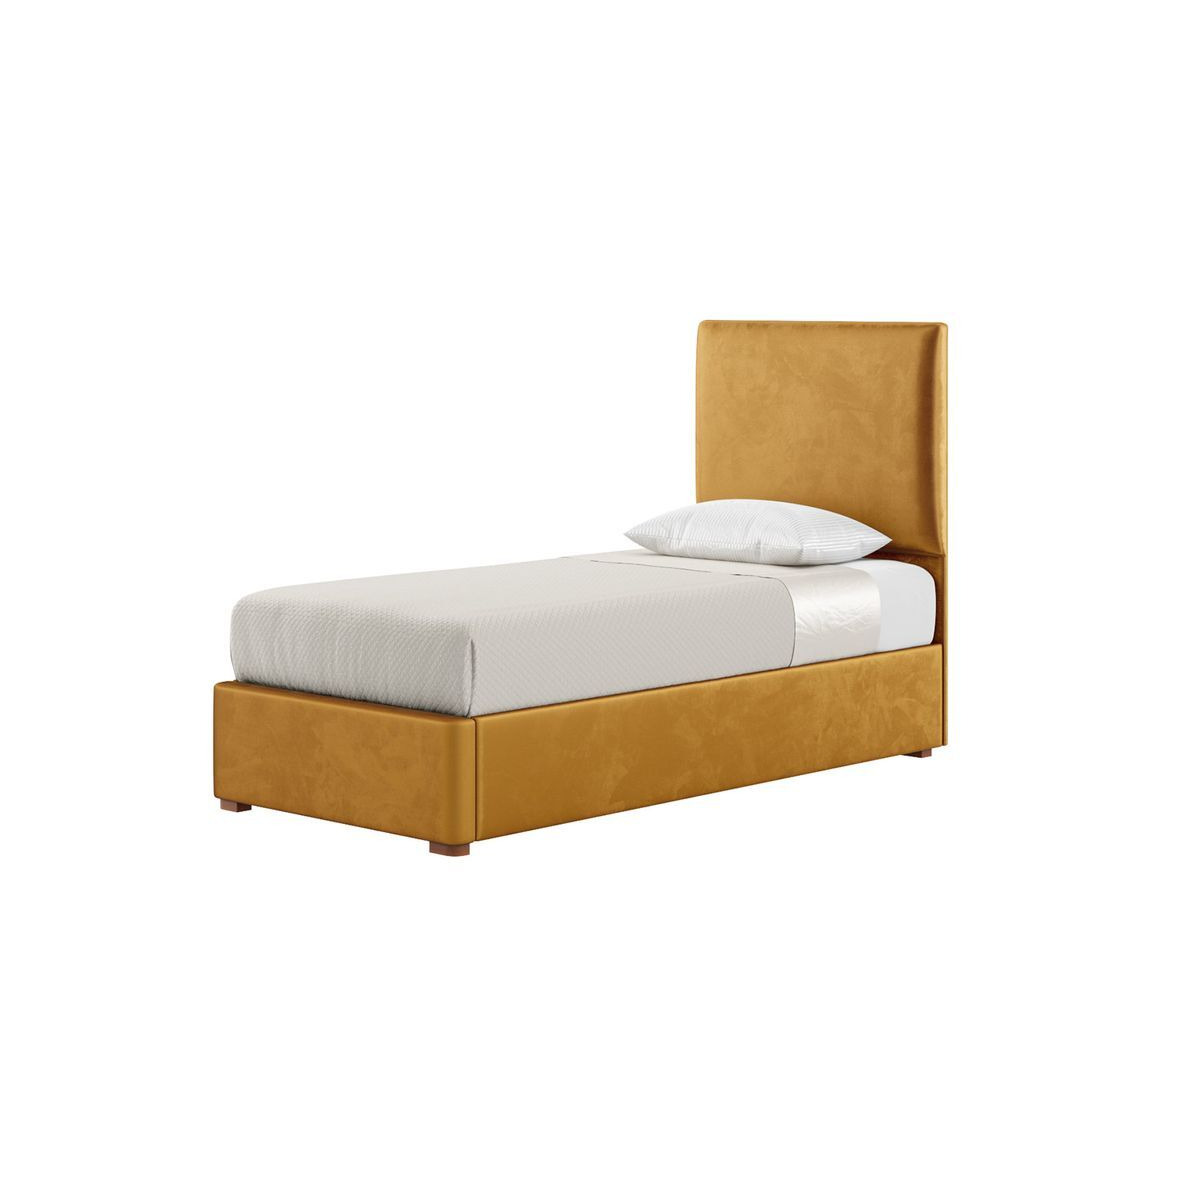 Darcy 3ft Single Bed Frame With Modern Smooth Headboard, mustard, Leg colour: aveo - image 1